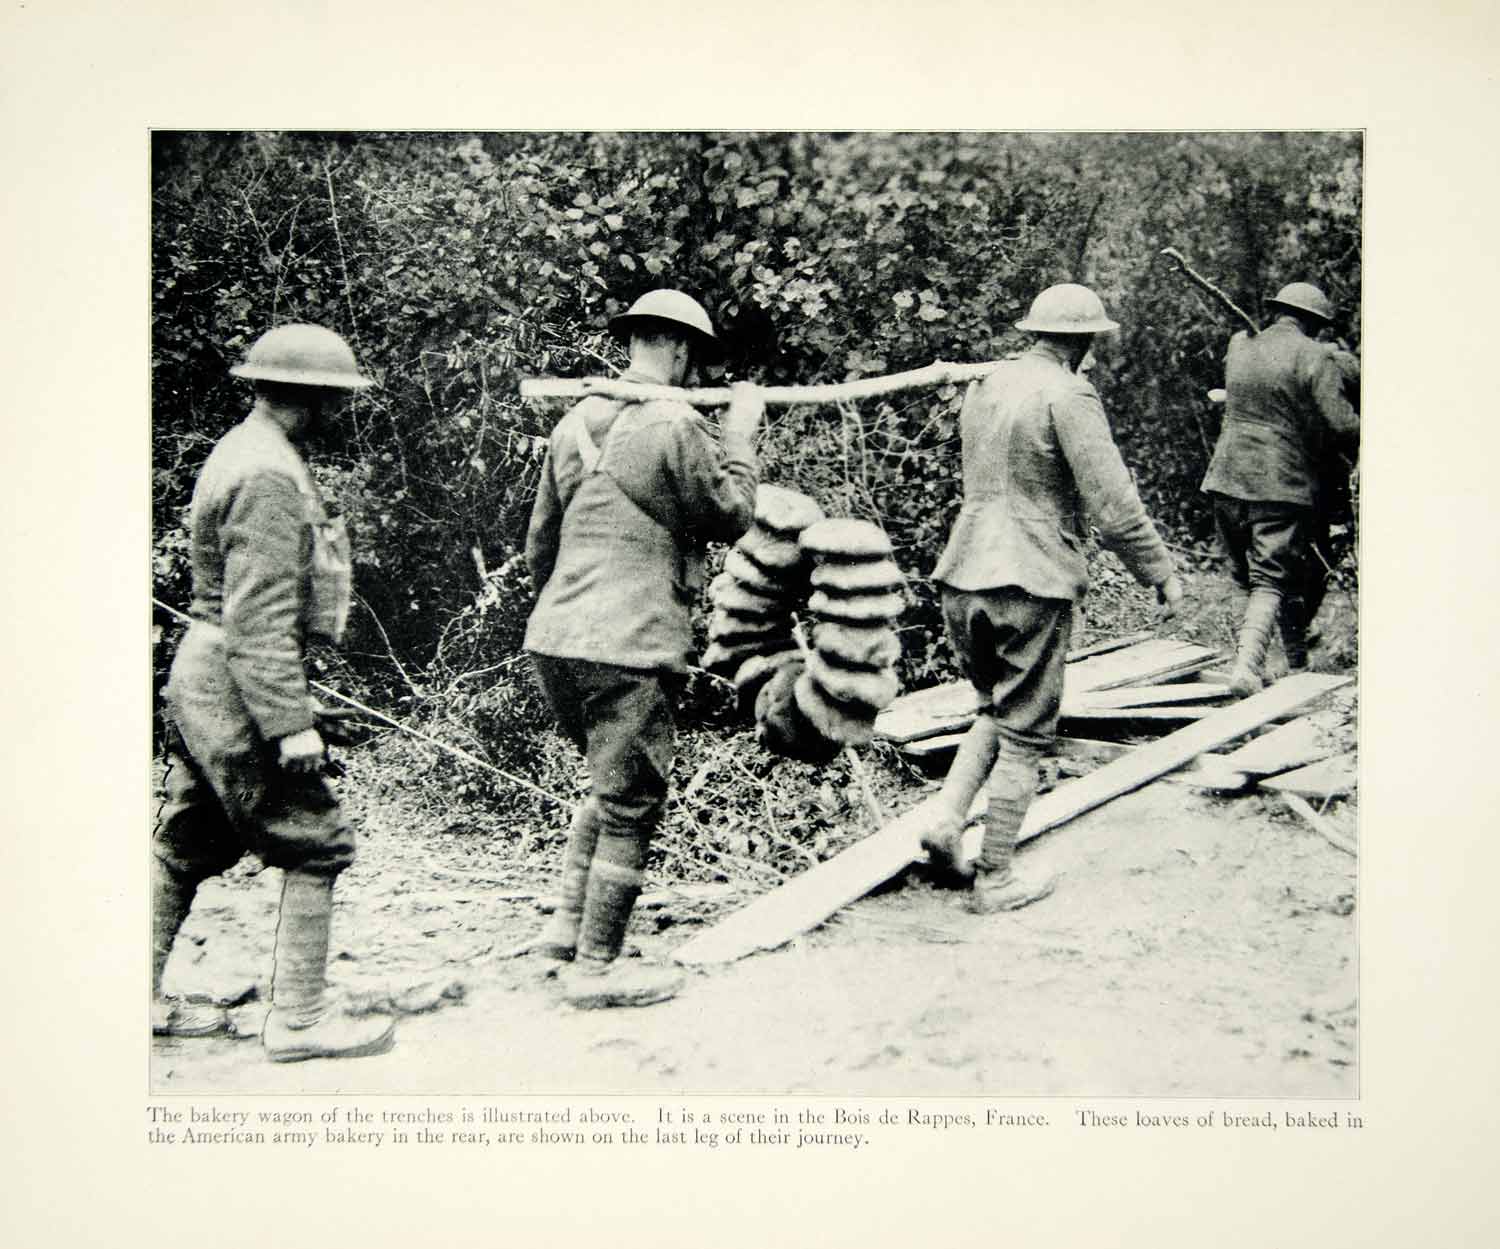 1934 Print WWI Doughboy US Army Soldier Bread Food Ration Bois De Rappes XEQA6